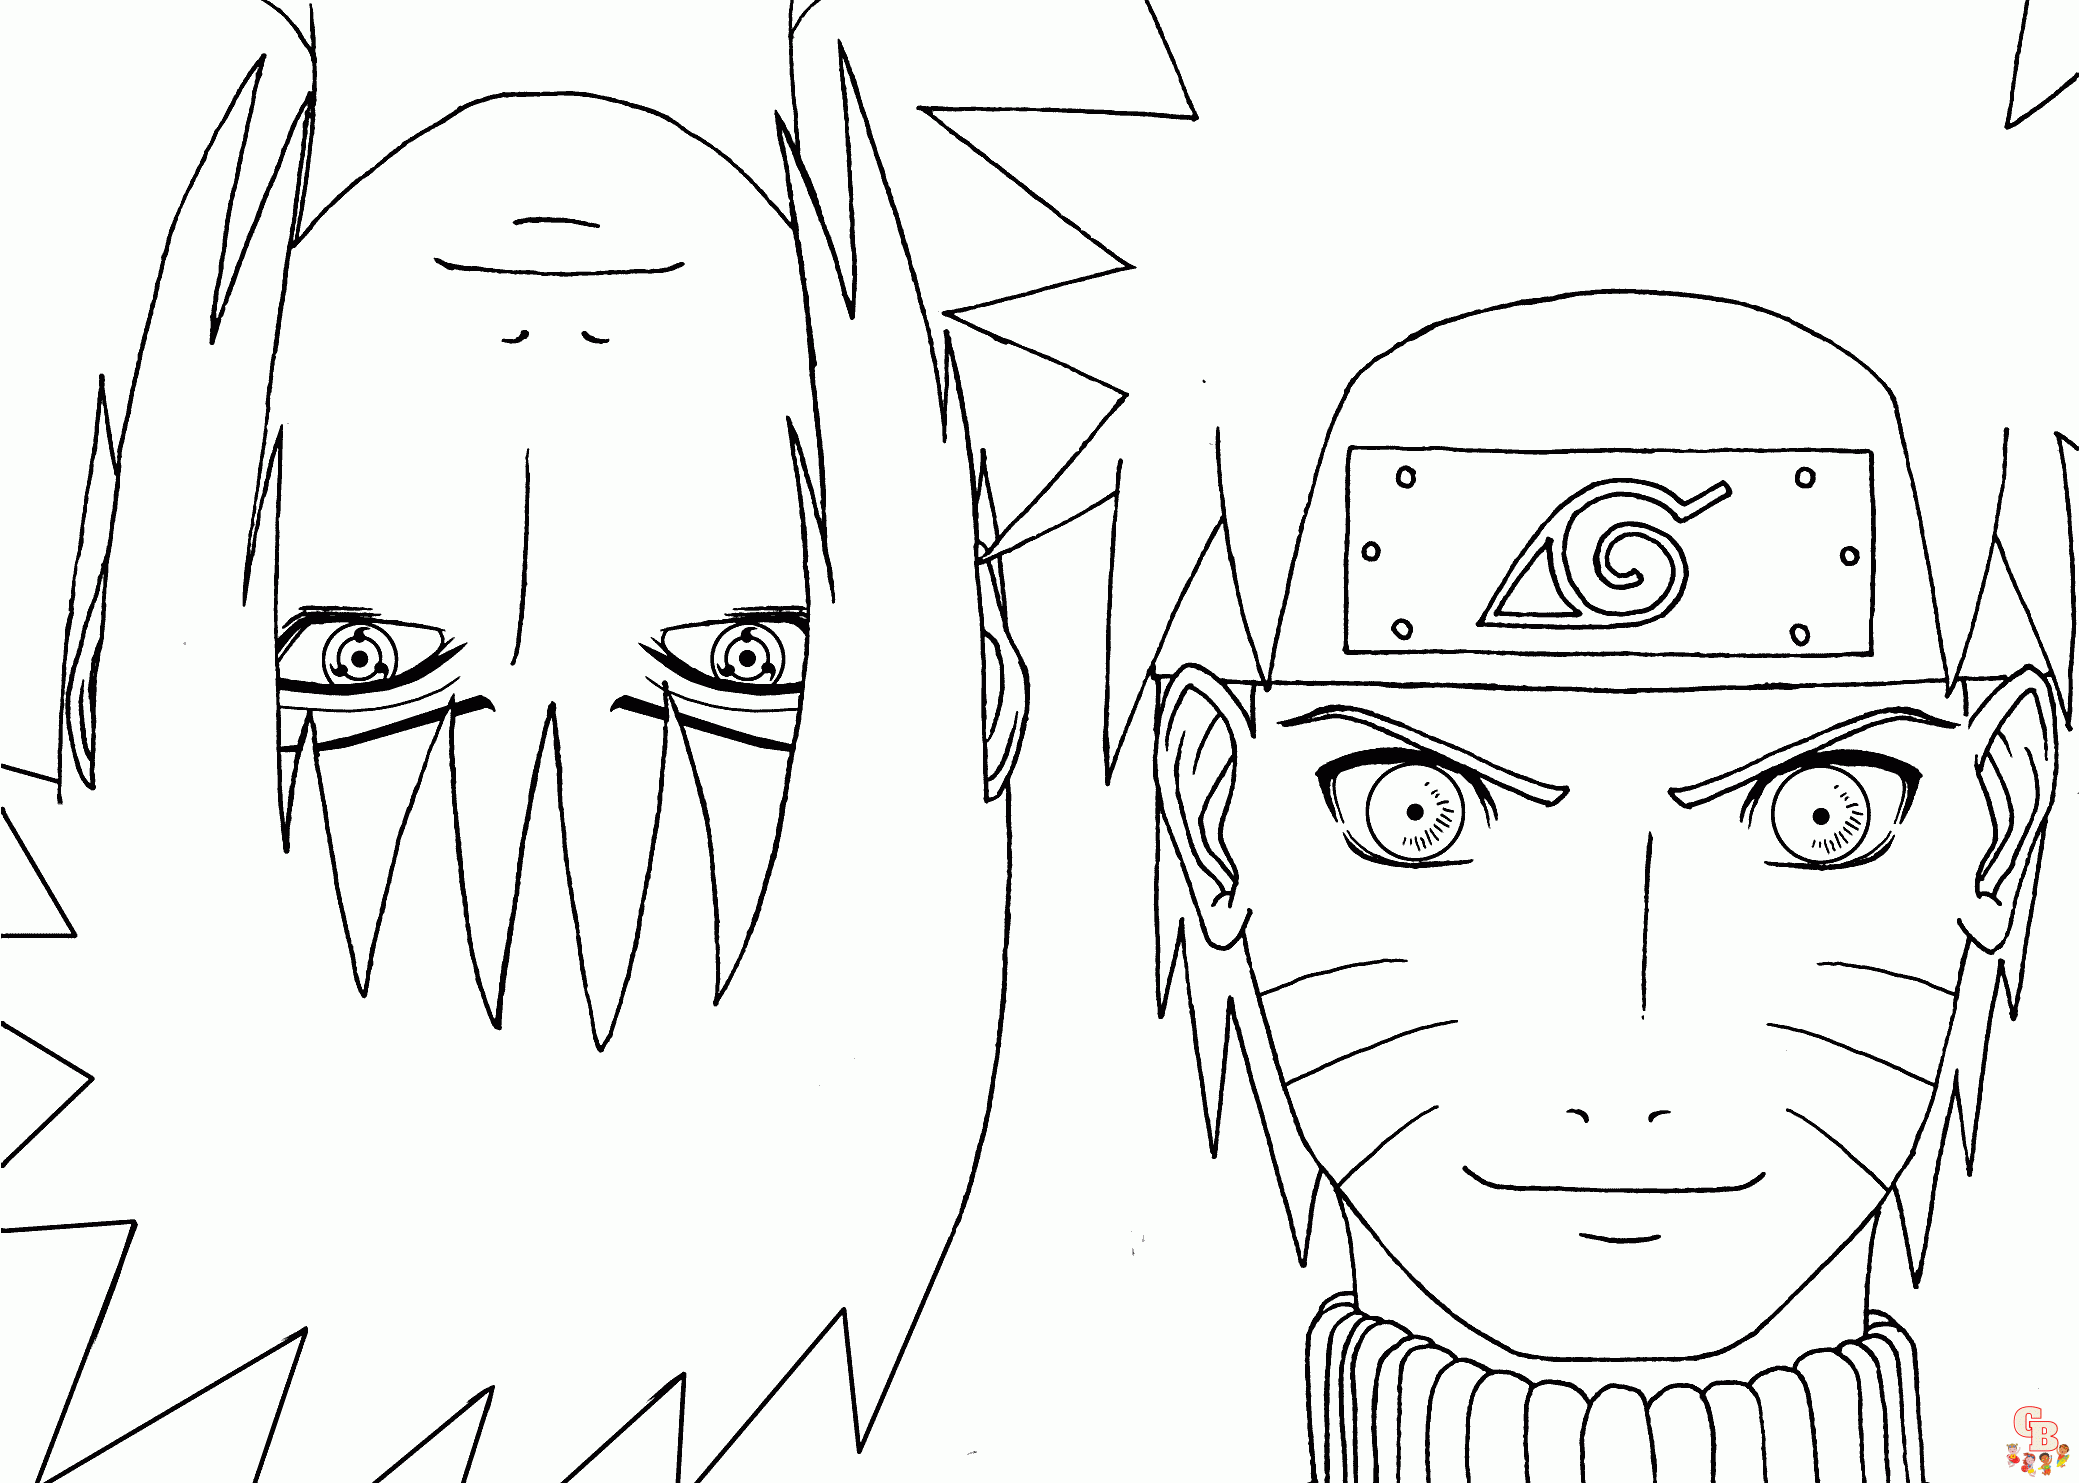 naruto and boruto Coloring Page - Anime Coloring Pages